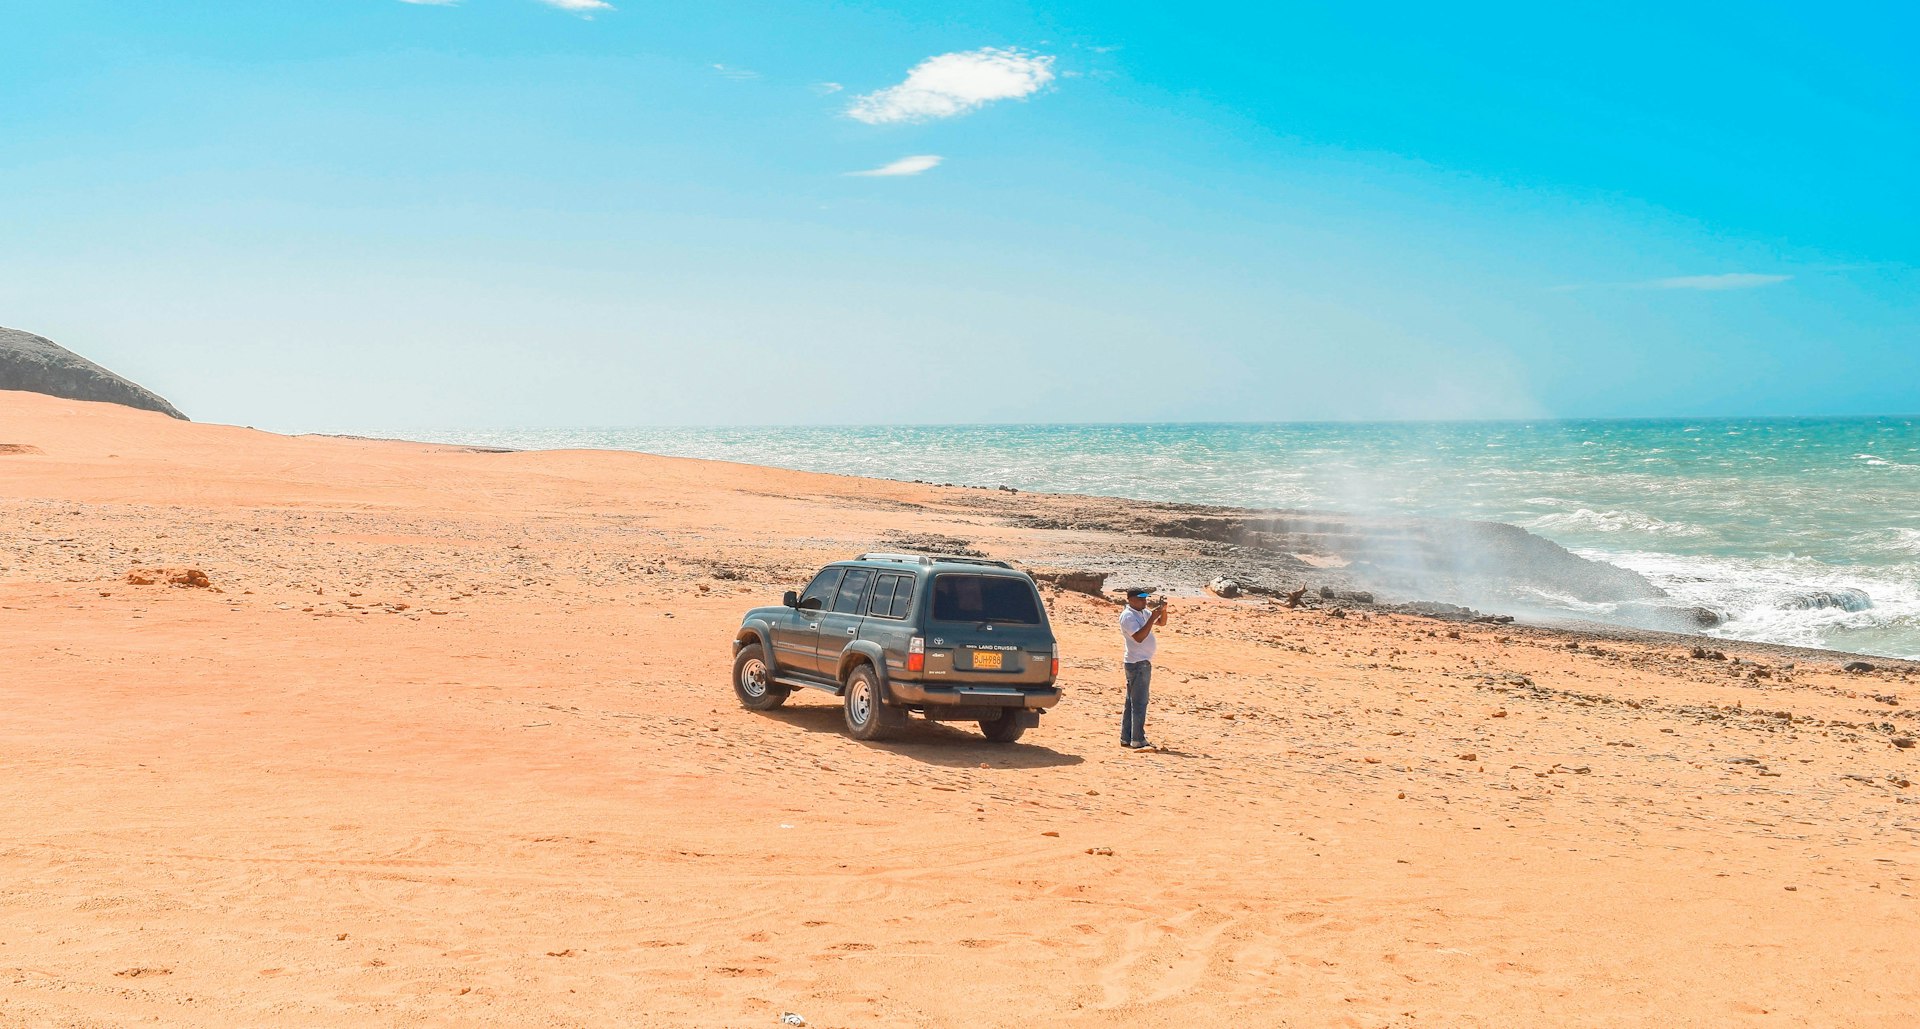 A 4WD vehicle is parked on sand on the Caribbean coastline; a guide is standing beside it, taking a photograph of the view out to sea.